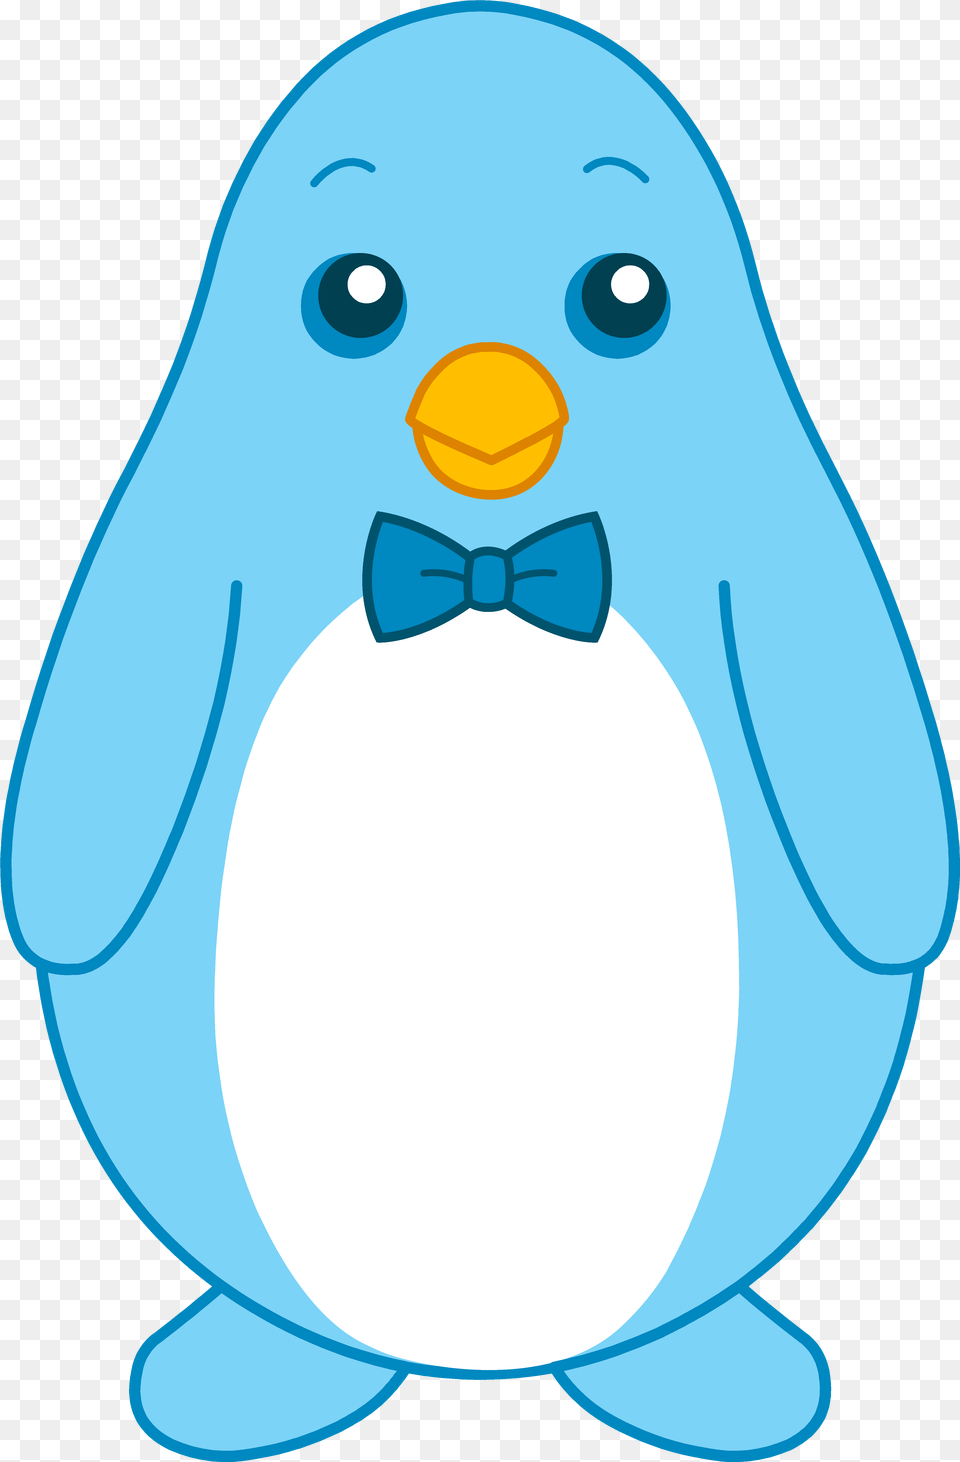 Cartoon Little Blue Penguin With Bow Tie Cartoon Little Blue Penguin, Accessories, Formal Wear, Animal, Bird Free Transparent Png